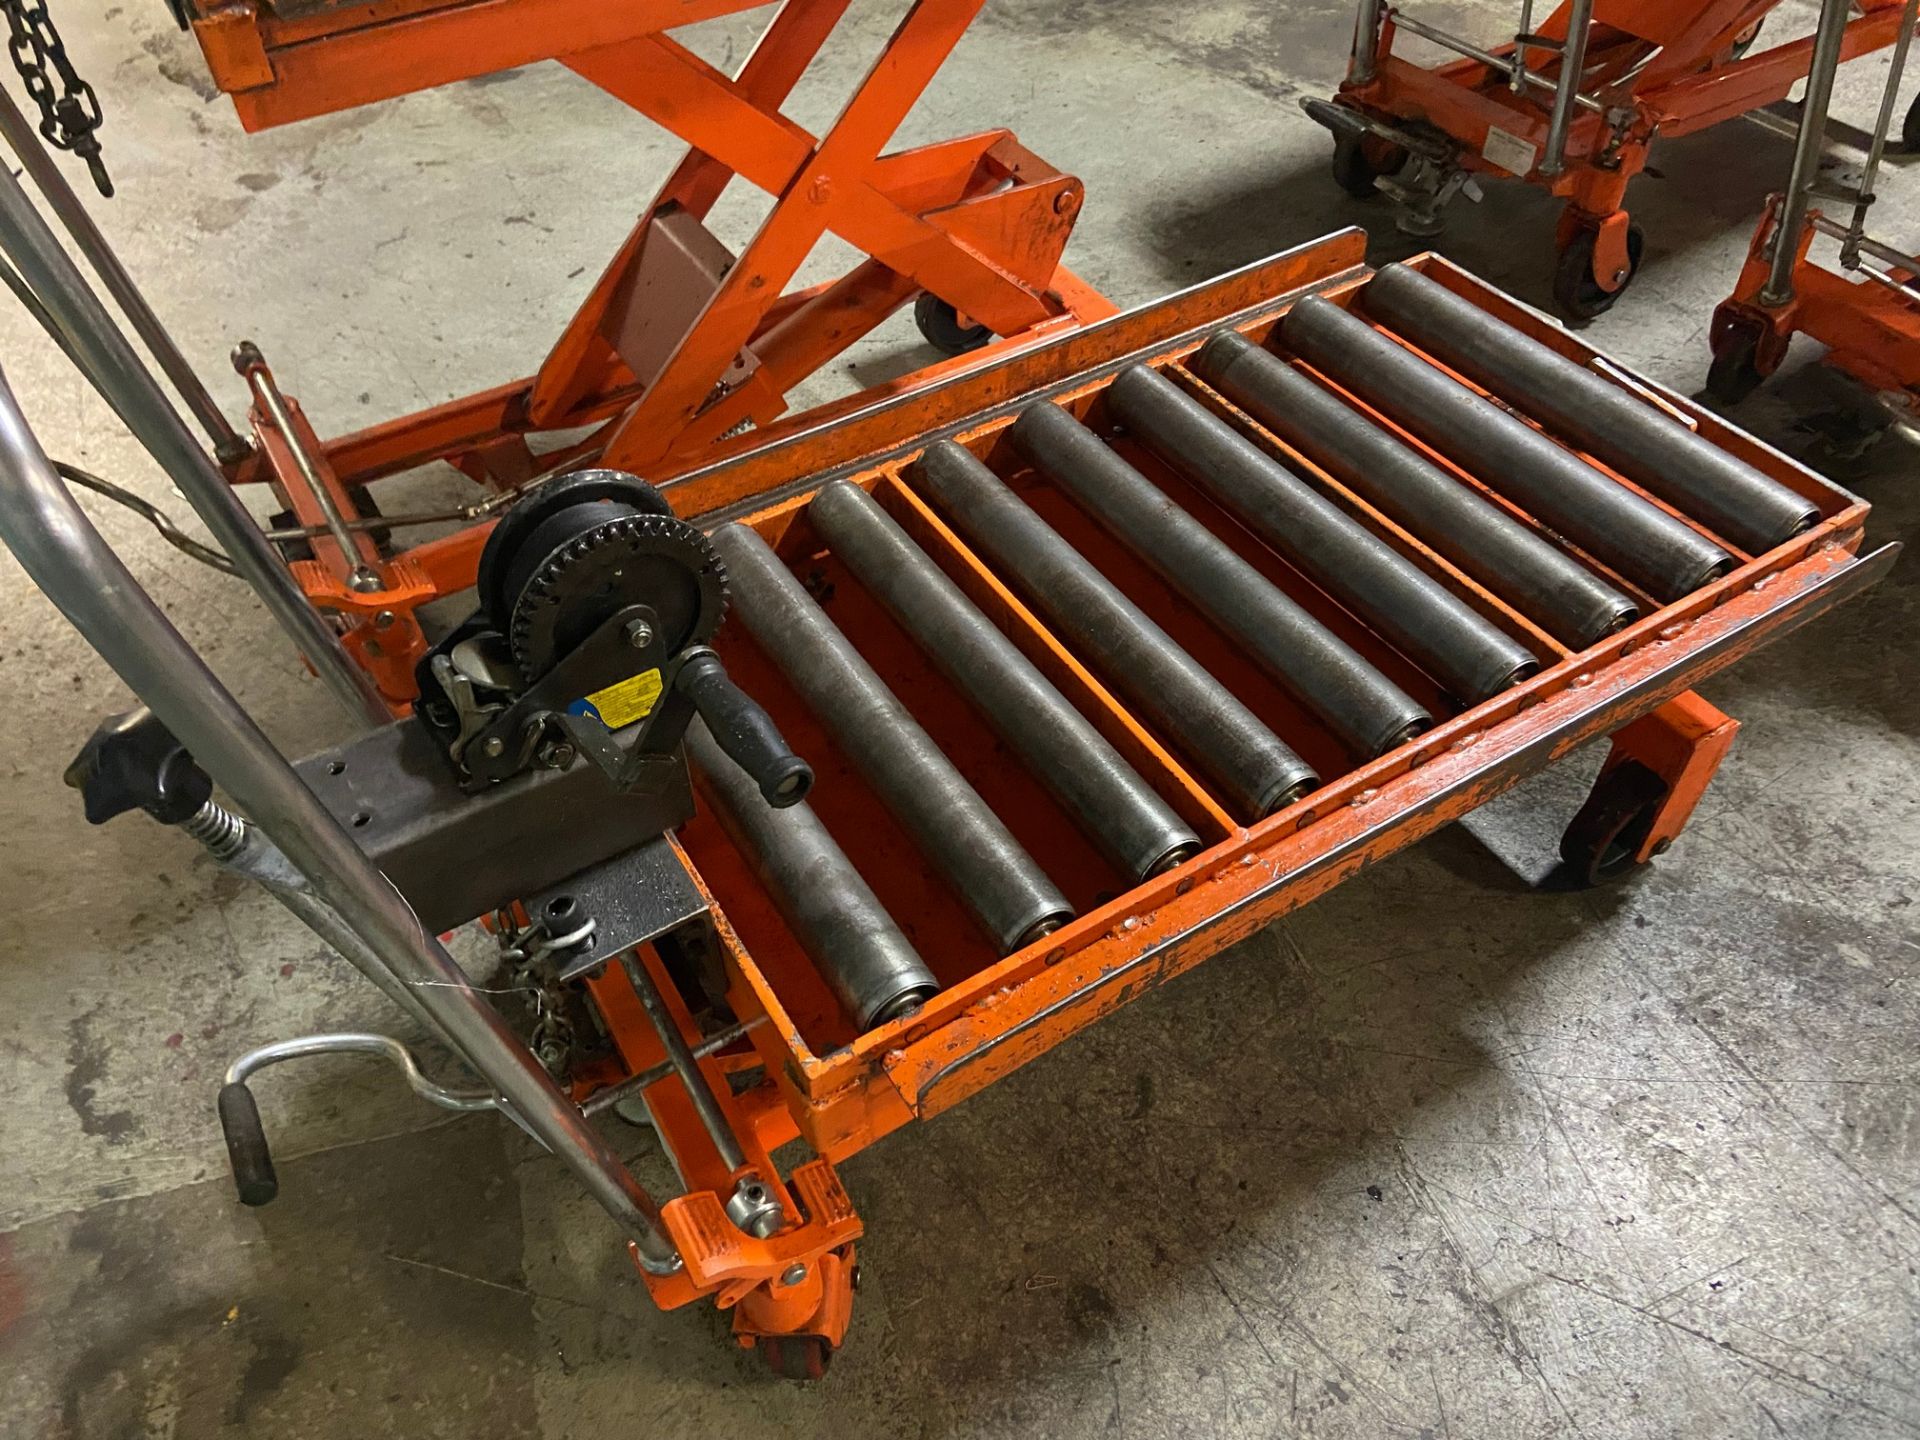 PORTABLE DIE LIFT TABLE ON CASTORS, 1650 LBS, C/W 19" X 39" ROLL TOP CONVEYOR & CABLE WINCH - Image 2 of 4